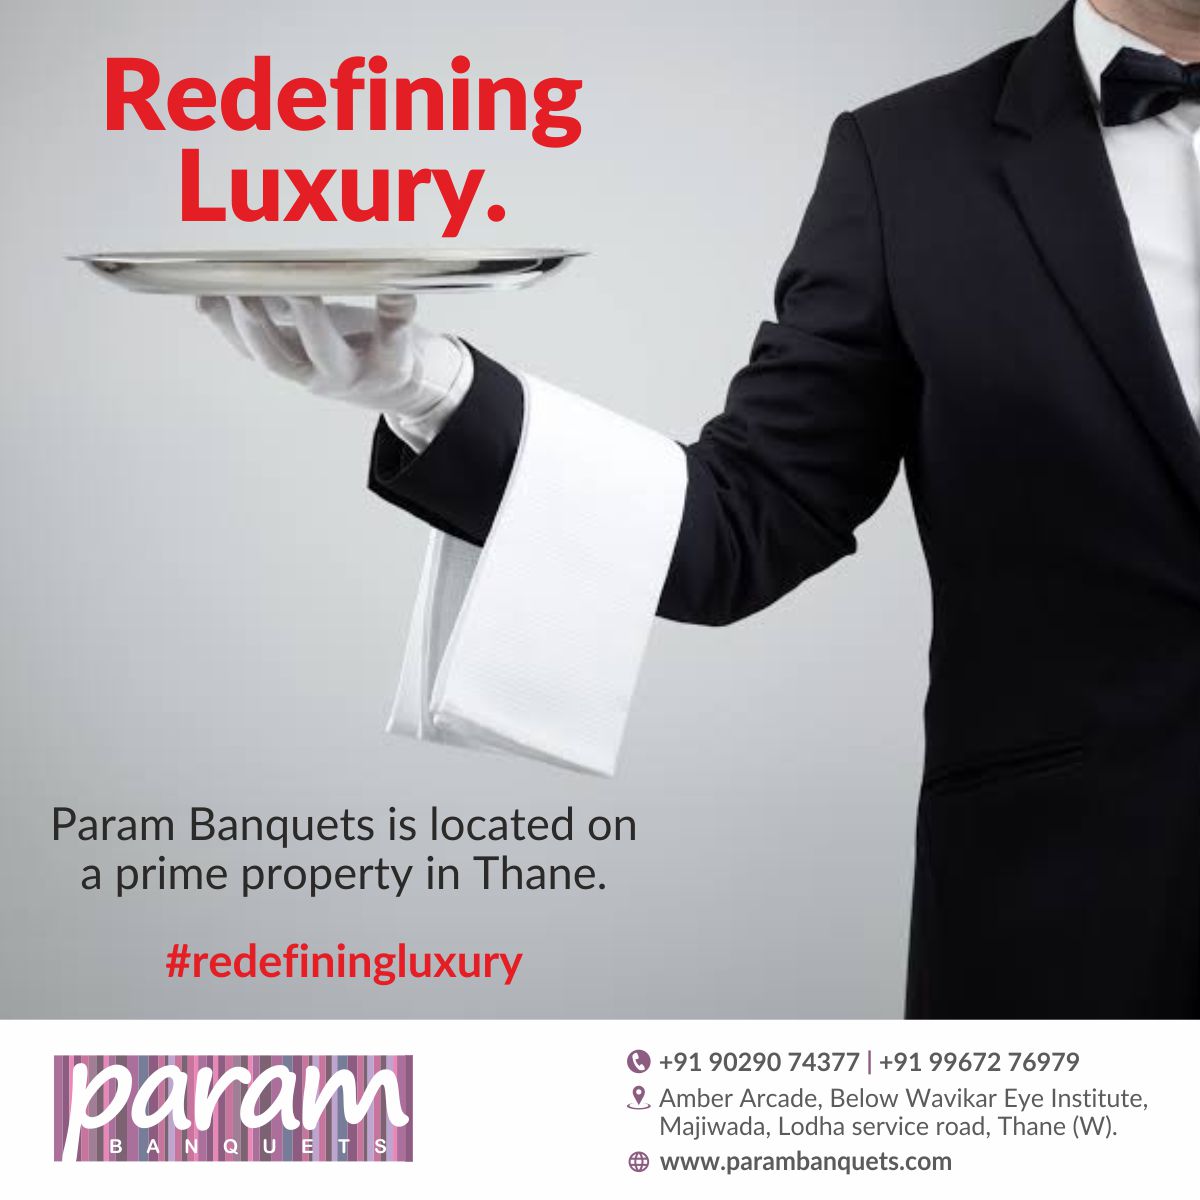 This makes it the perfect option where guests can be connected to the business as well as the entertainment hubs around town. Banqueting at Param Banquets will add glamour to any occasion. 

parambanquets.com

#redefiningluxury #banquetsetup #wedding